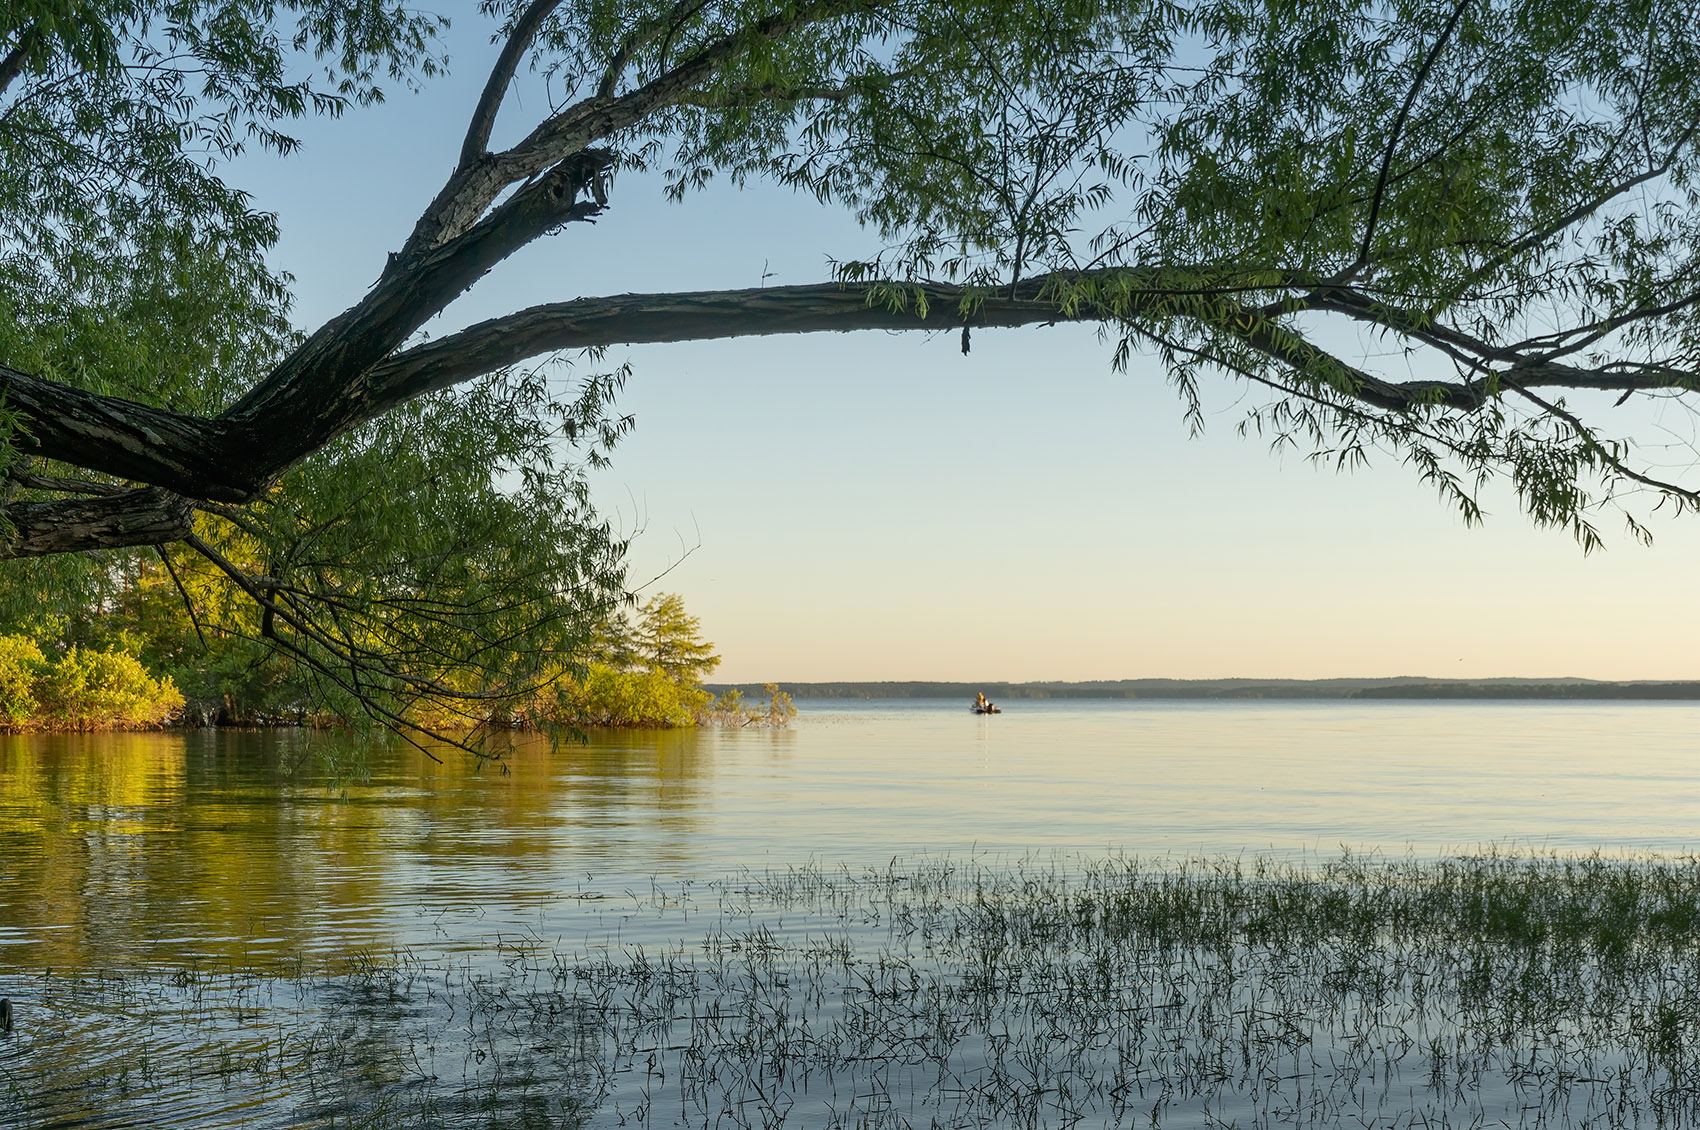 trees line shoreline of toledo bend reservoir with fishing boat in distance in late afternoon sunlight